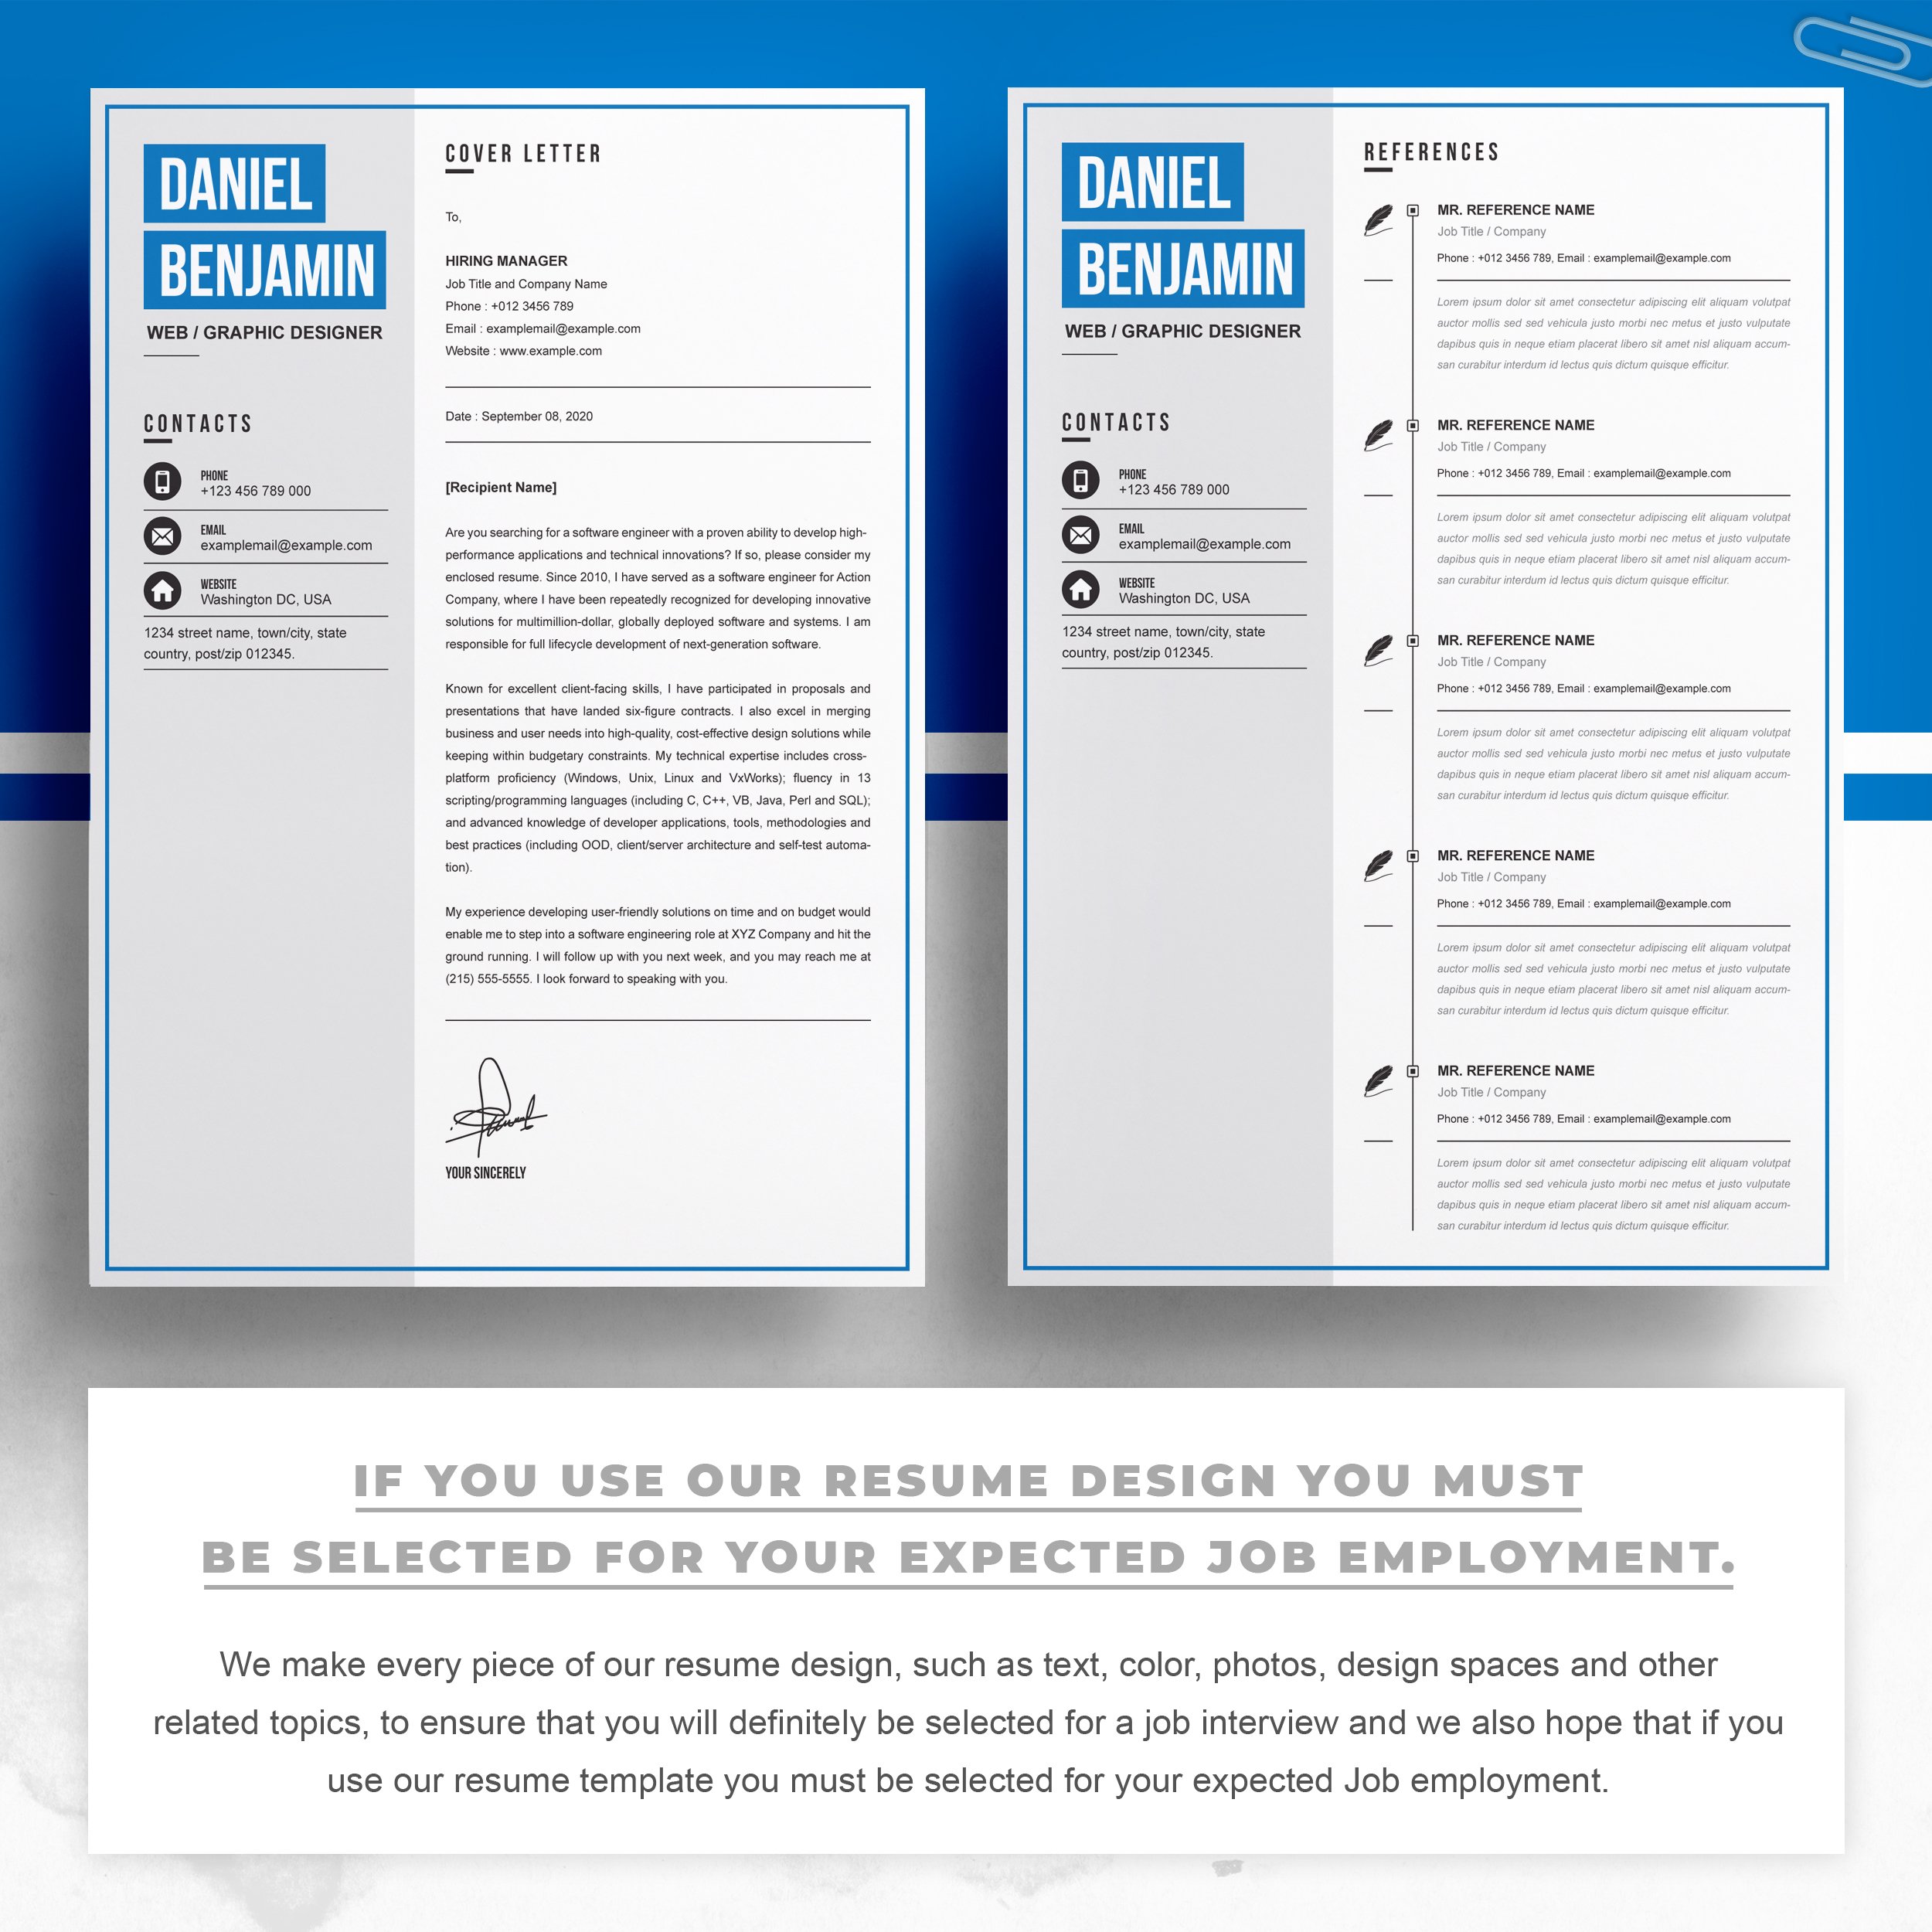 03 2 pages free resume design template 926